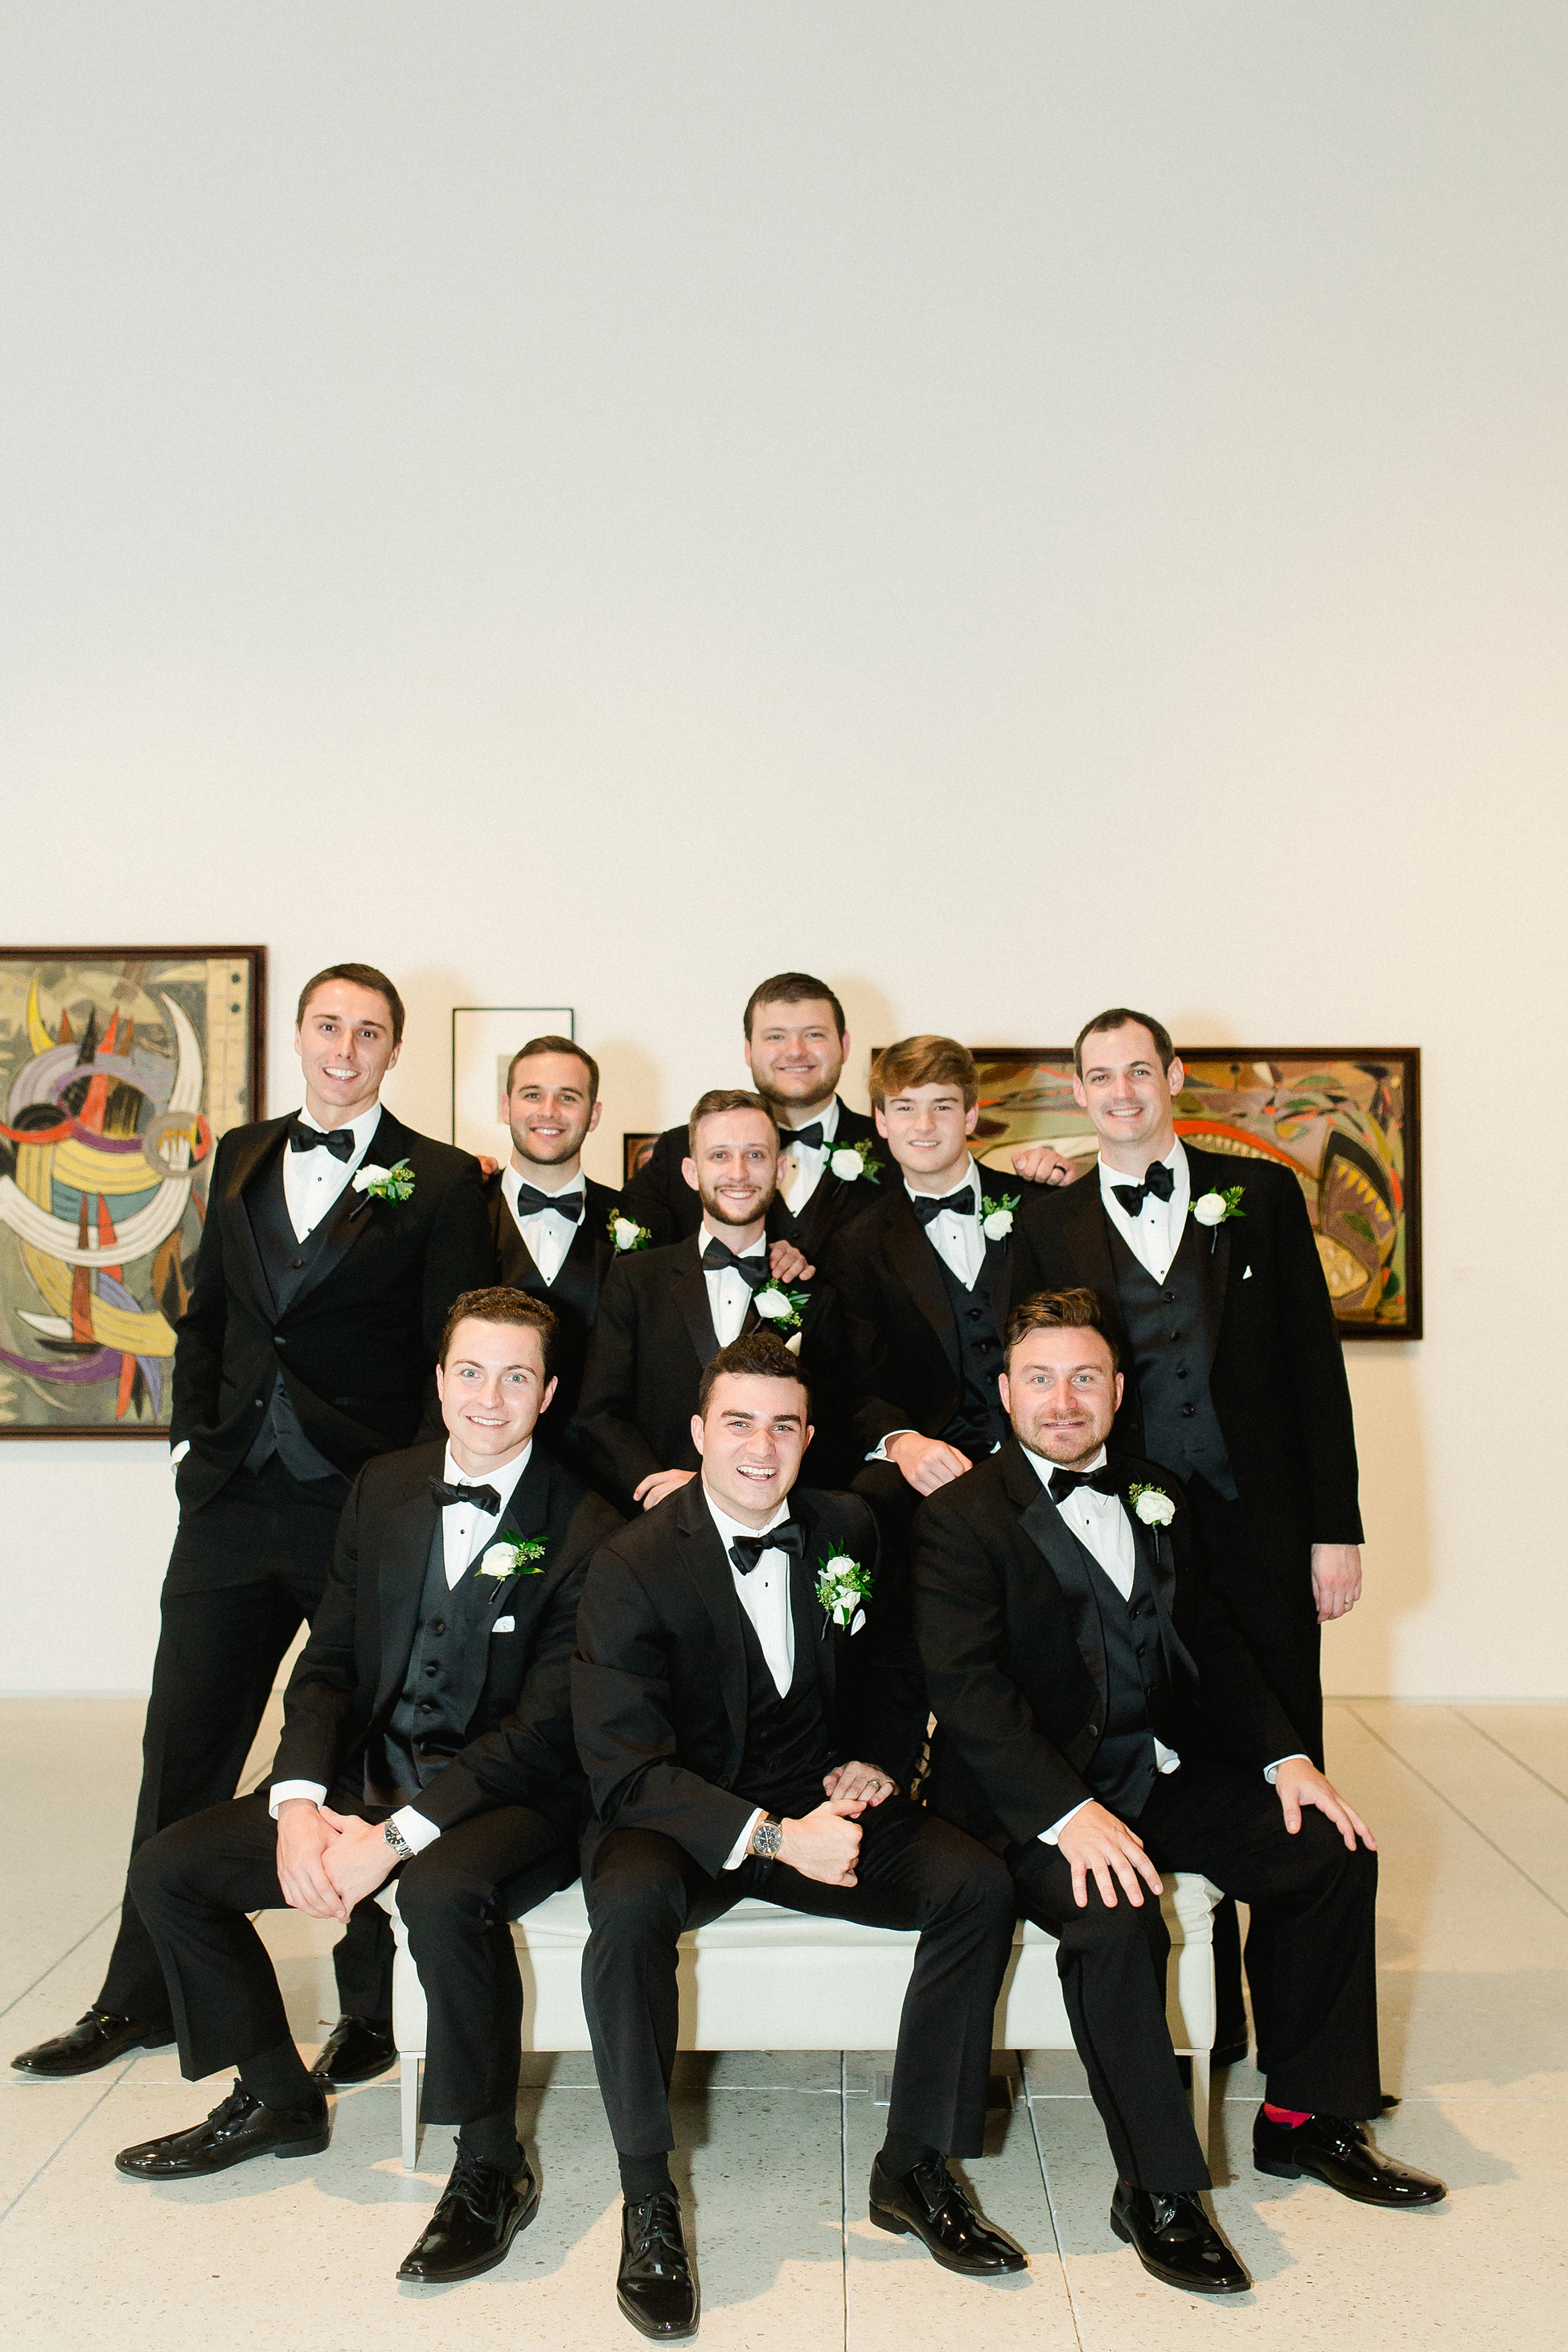 Tampa Museum of Art Wedding | © Ailyn La Torre Photography 2019